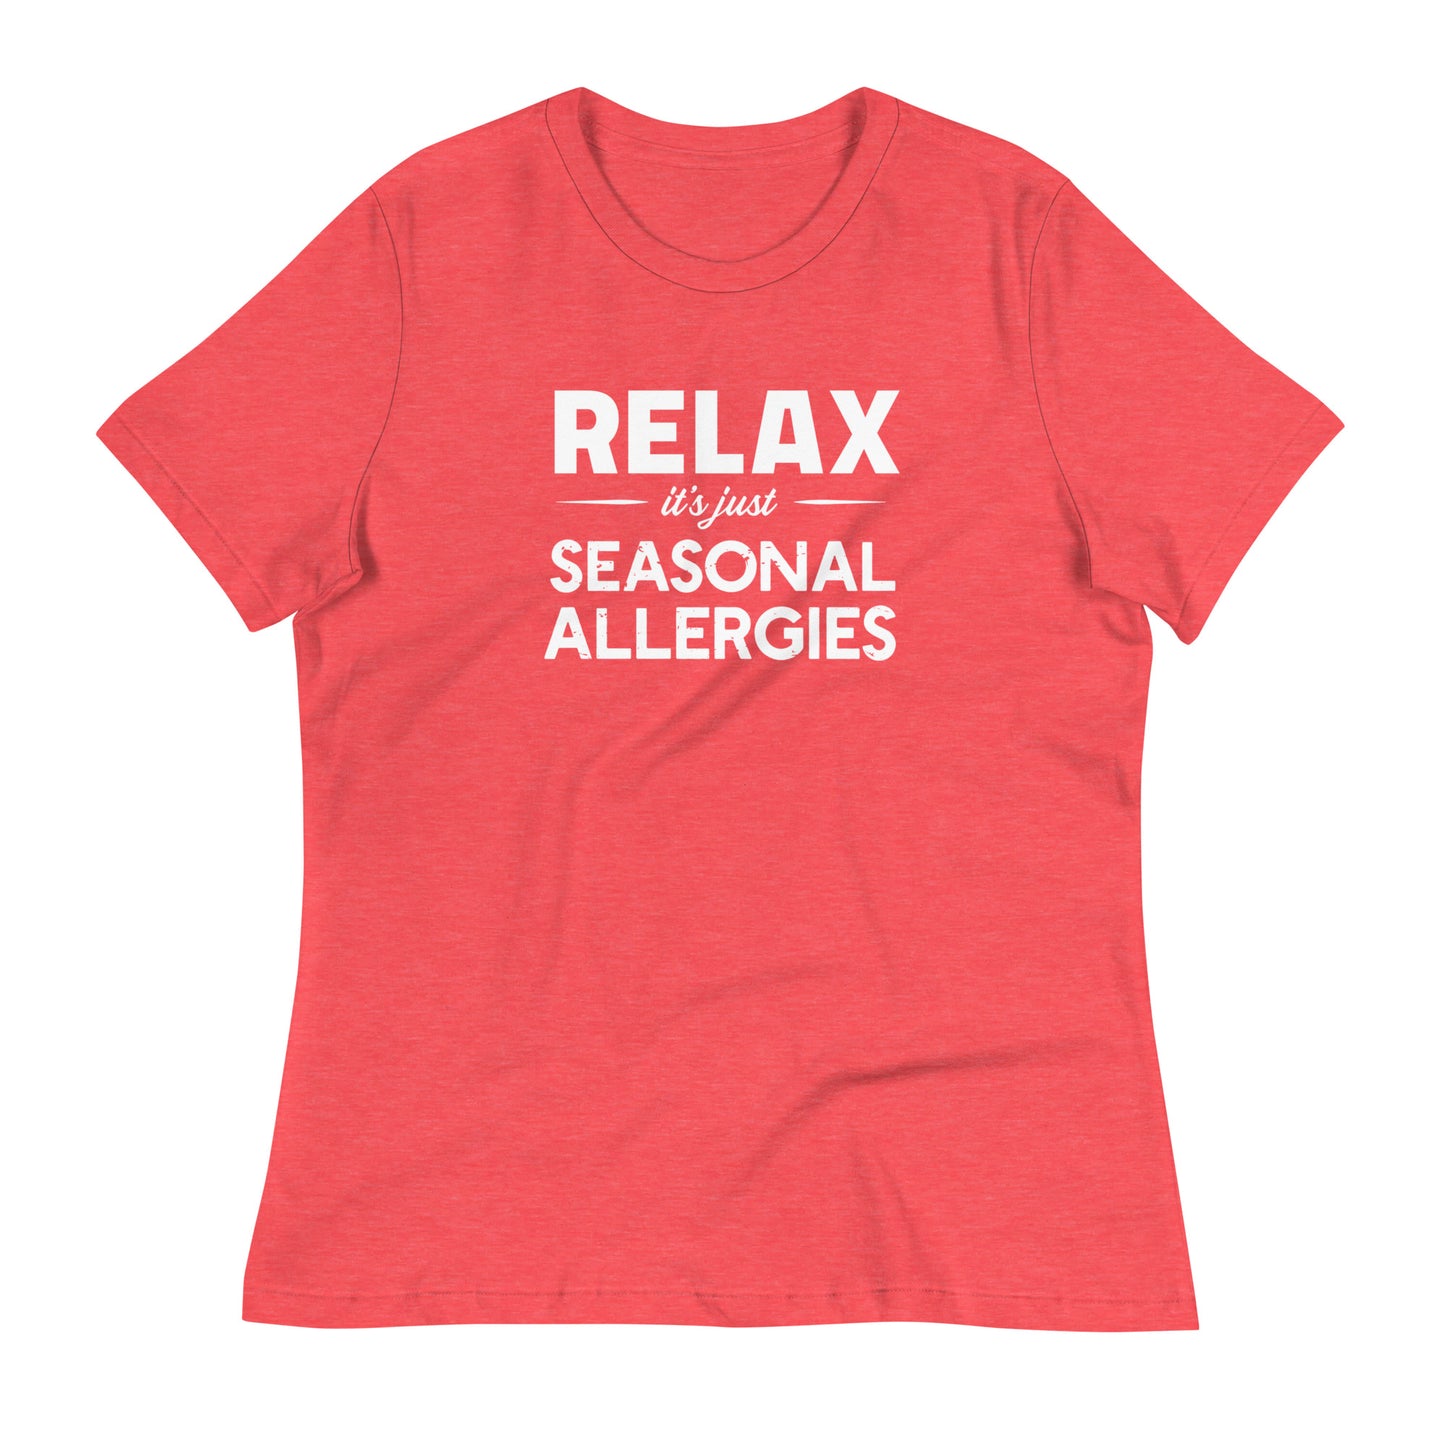 Heather Red women's relaxed fit t-shirt with white graphic: "RELAX it's just SEASONAL ALLERGIES"